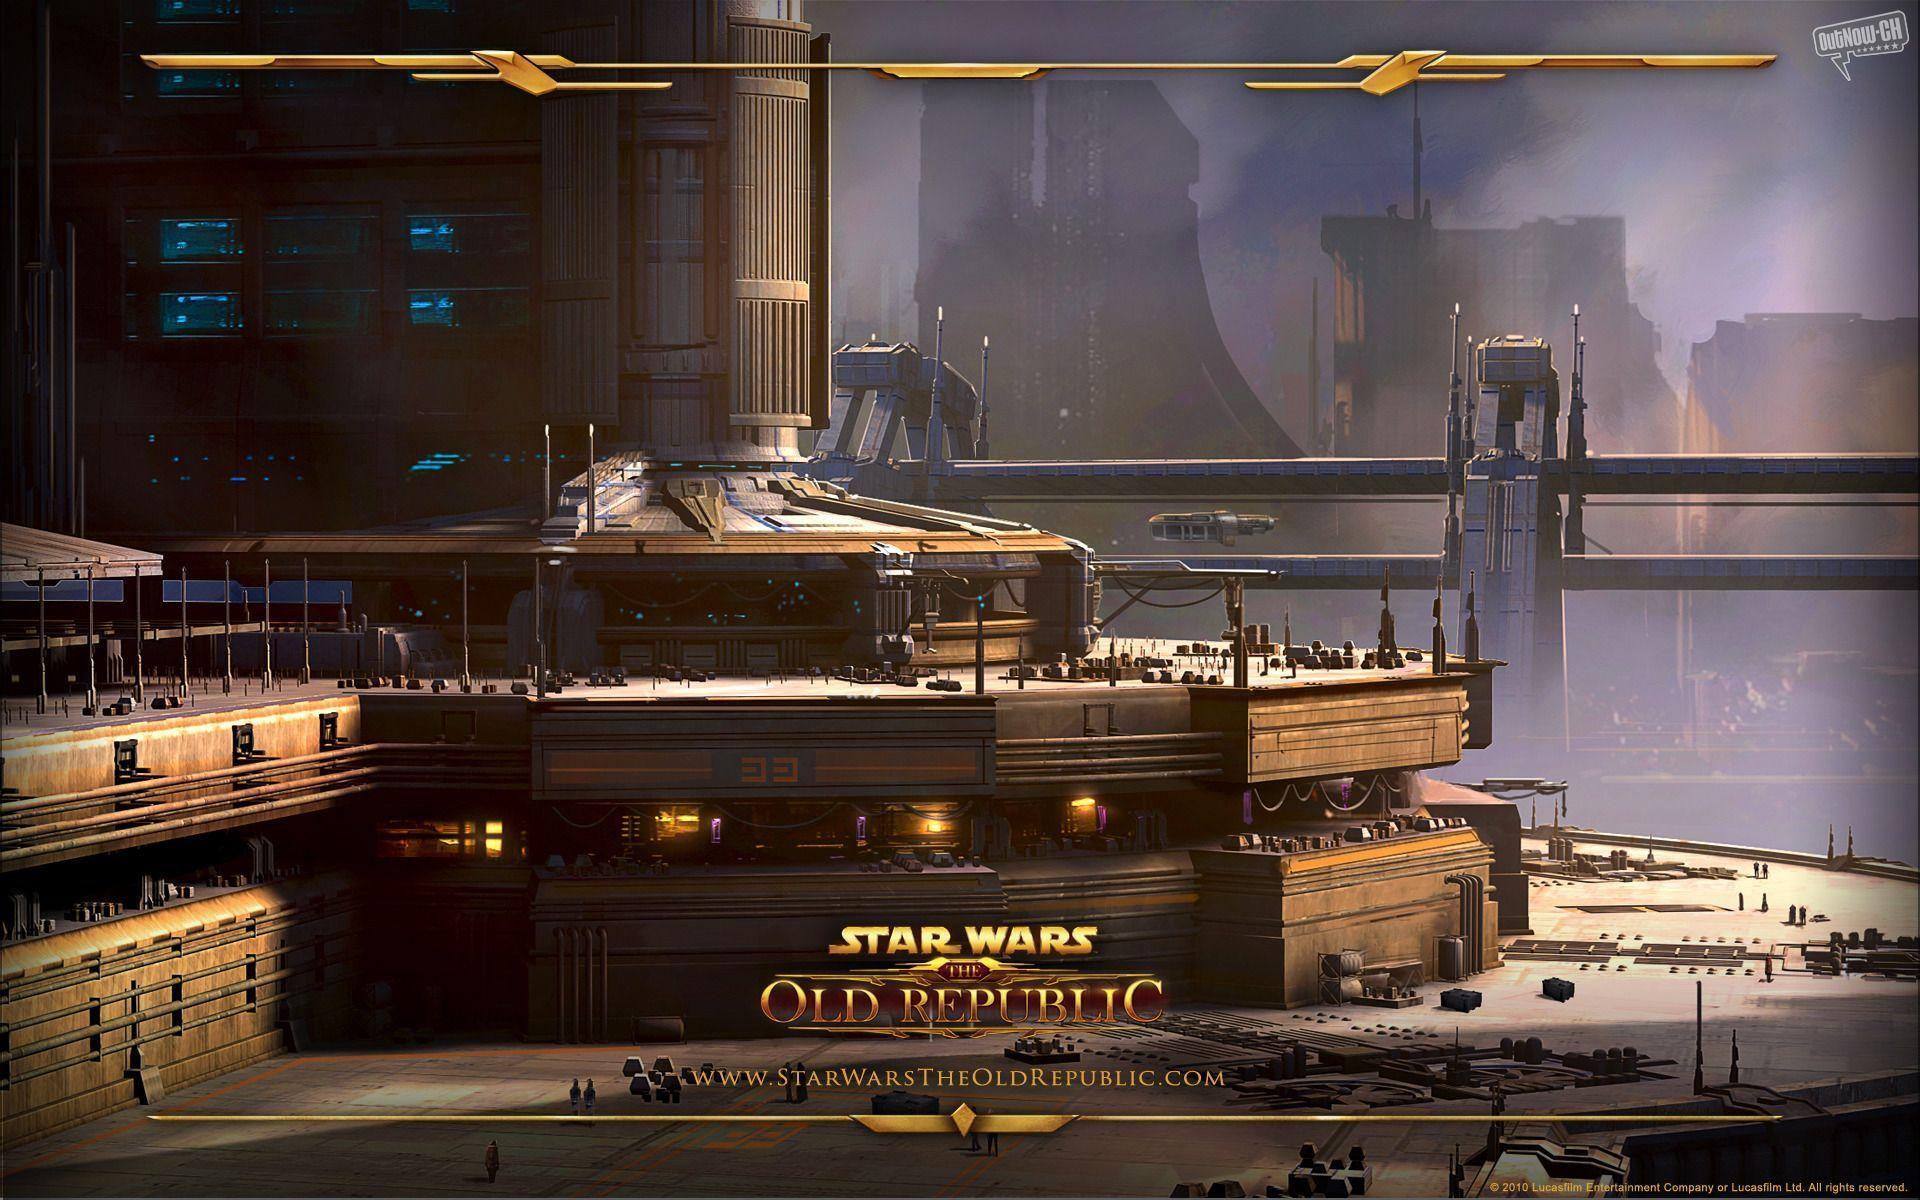 Star Wars: The Old Republic wallpaper. Star Wars: The Old